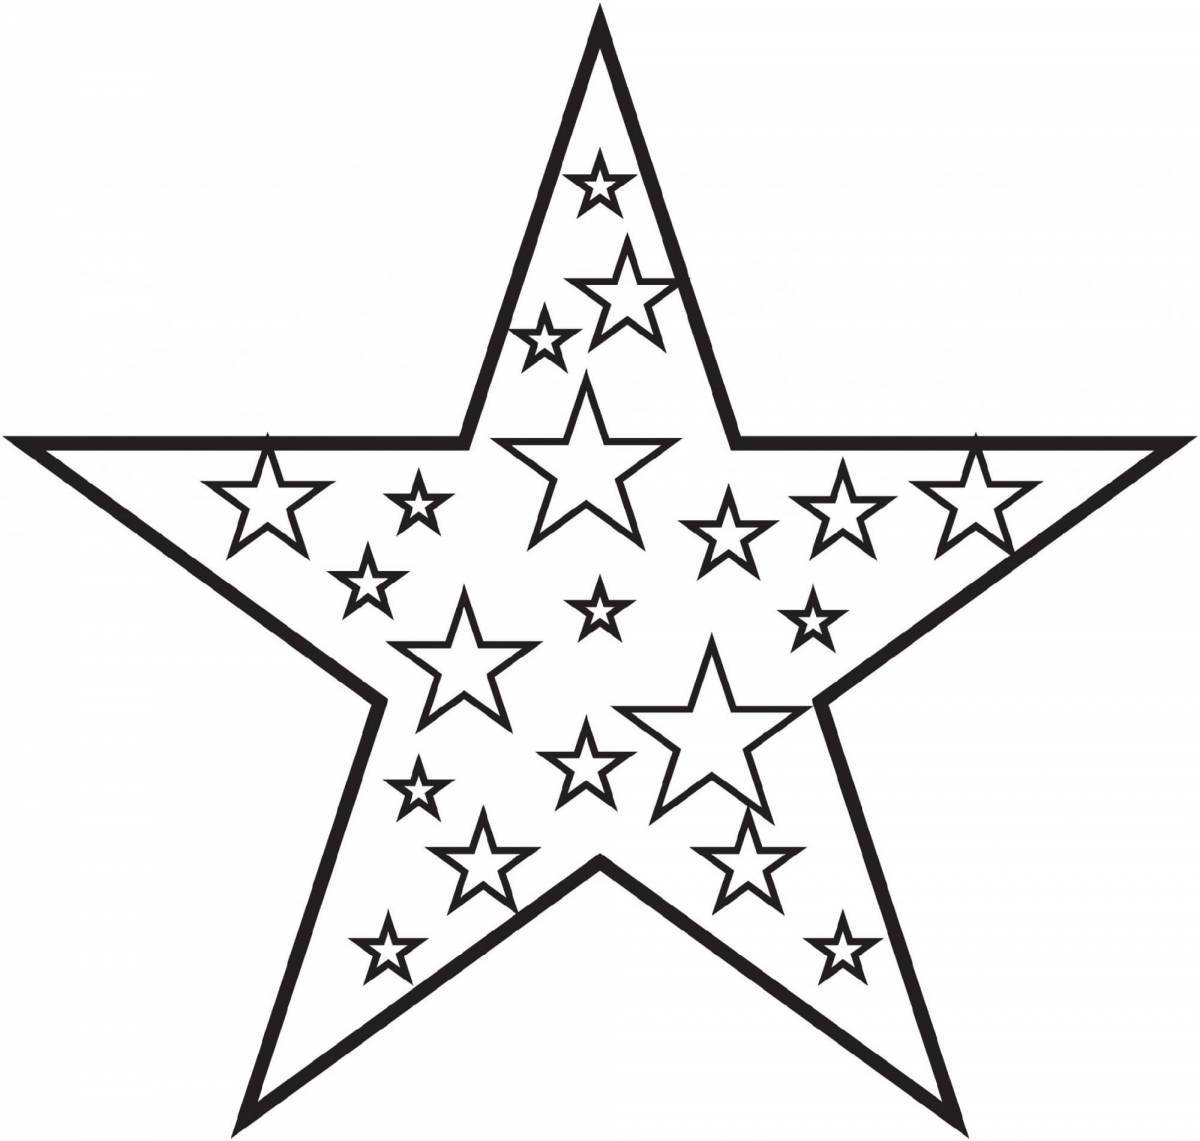 Coloring page funny star pattern